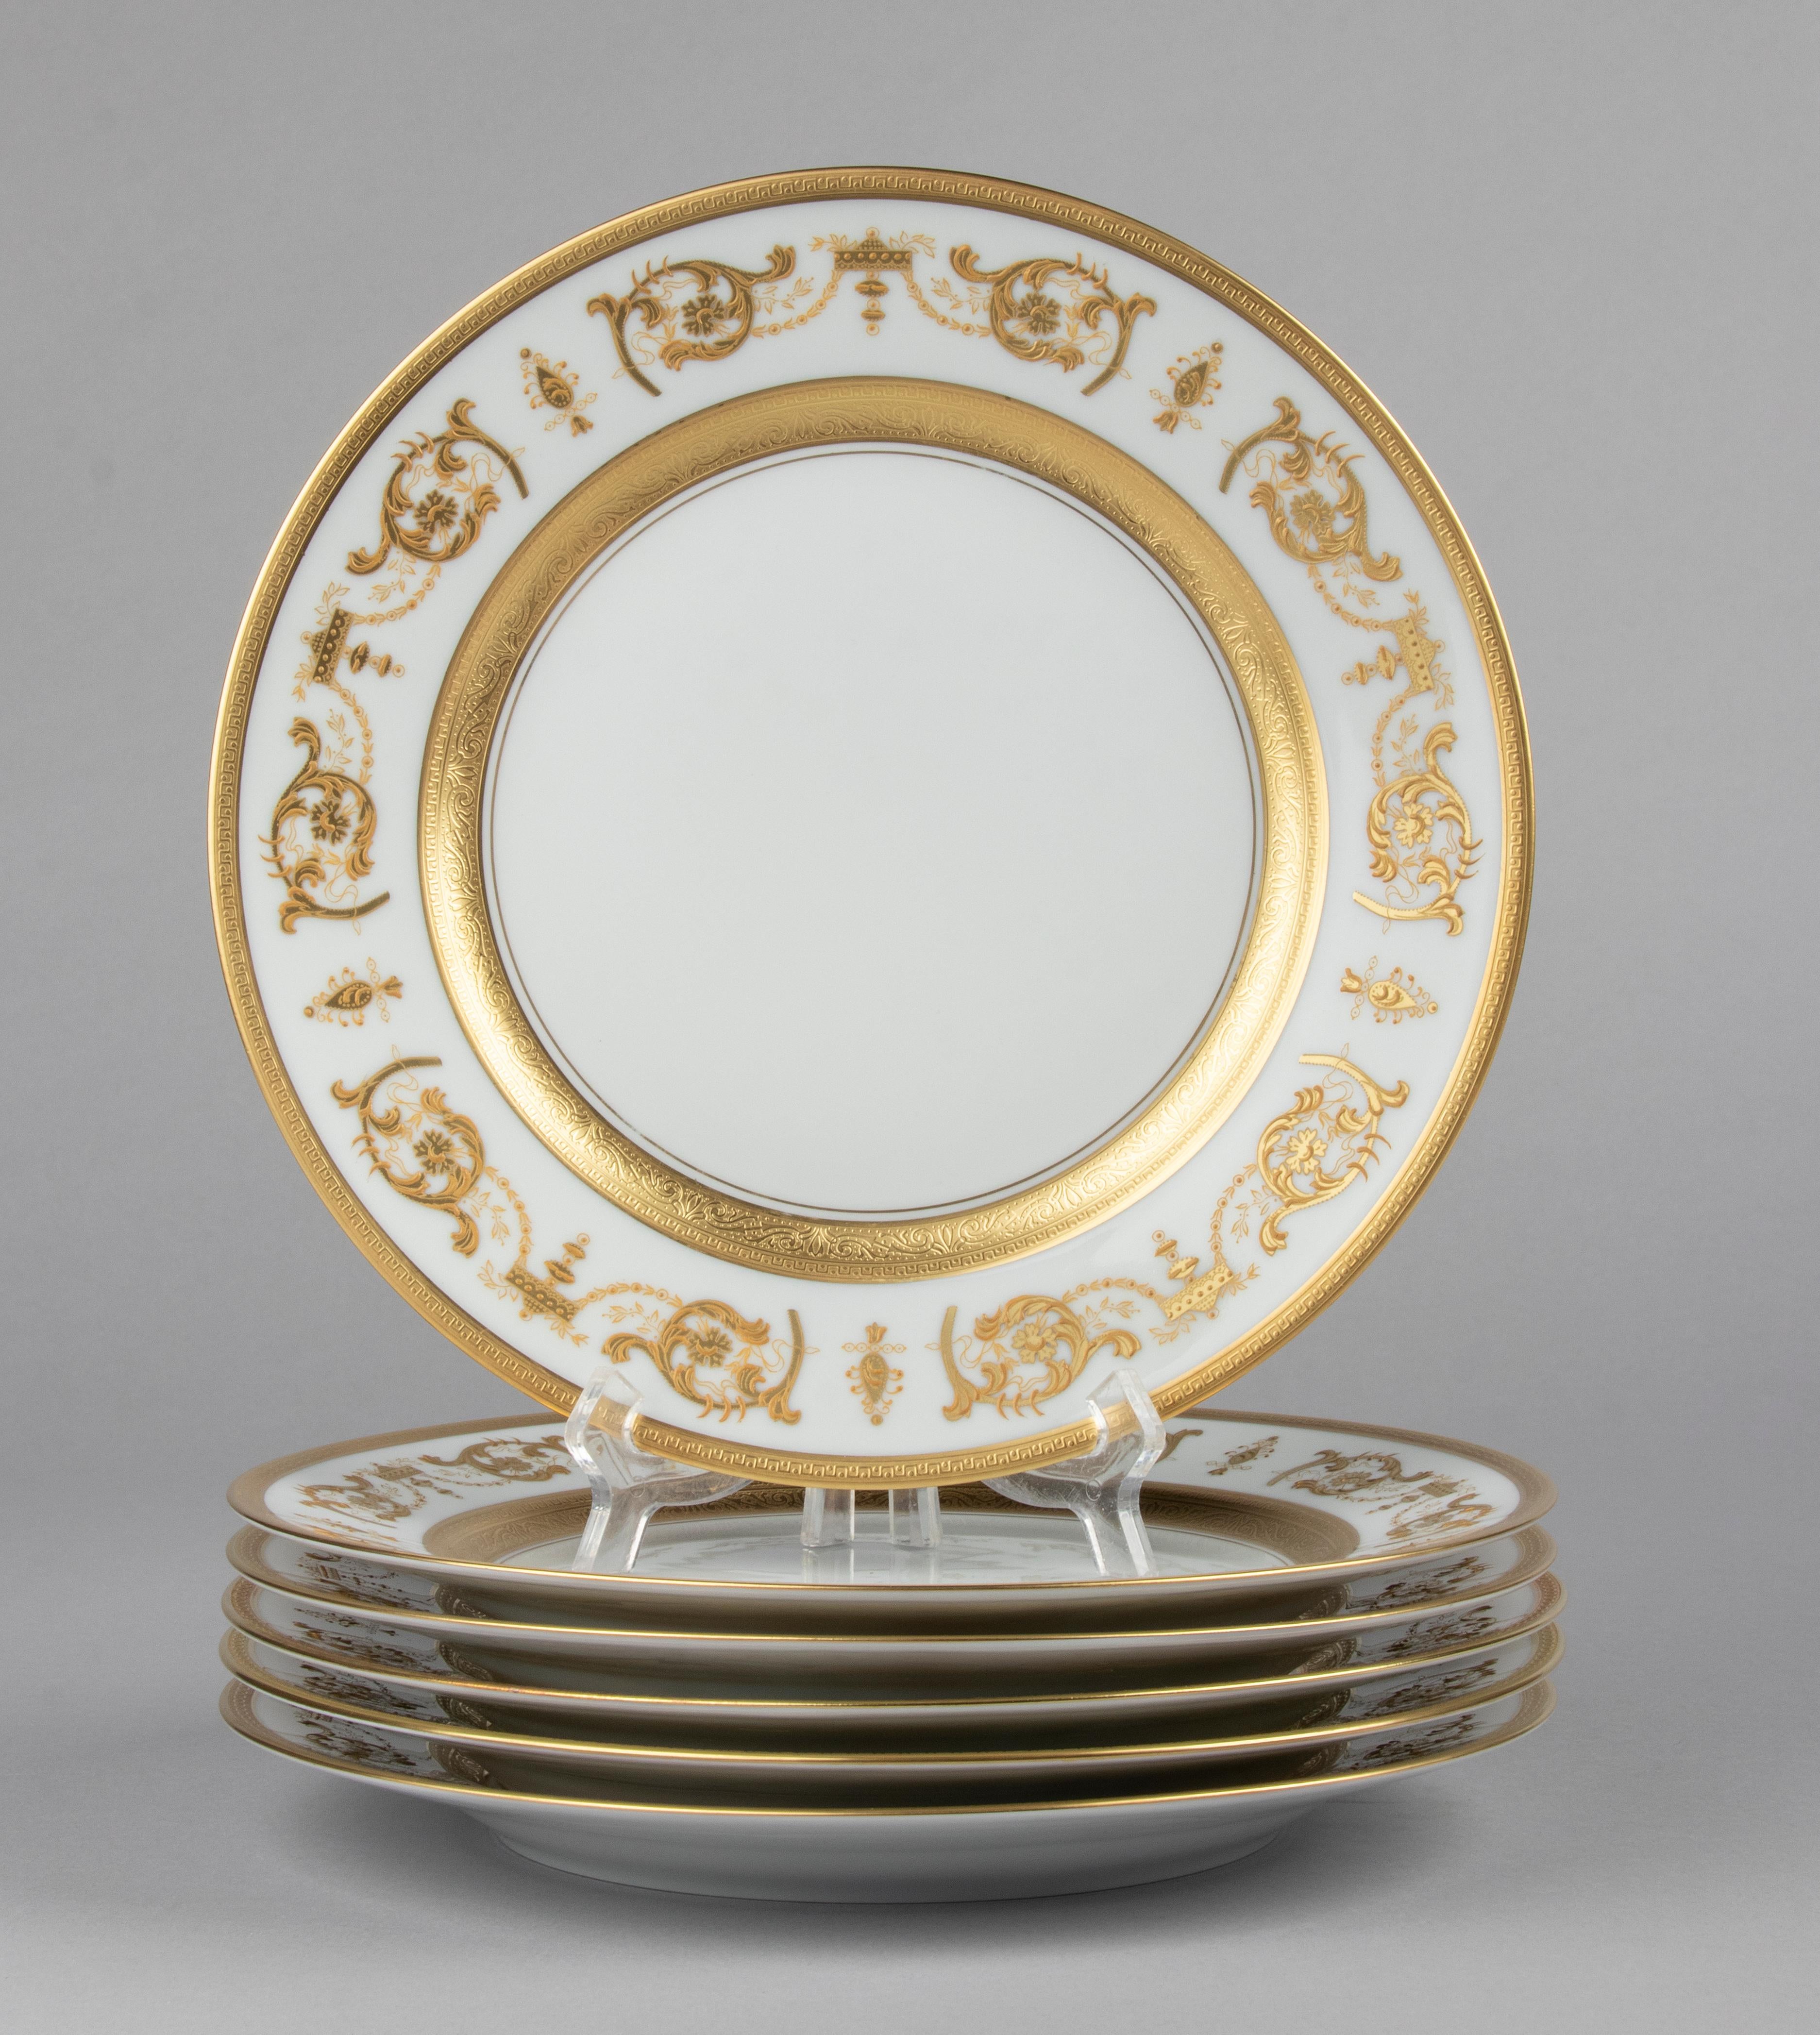 Superb set of 6 porcelain dinner plates, made by the French brand Haviland Limoges. The plates are of exceptionally high quality, with beautiful gold decorations. The name of the pattern is Impérator Or. These plates can still be ordered new in the